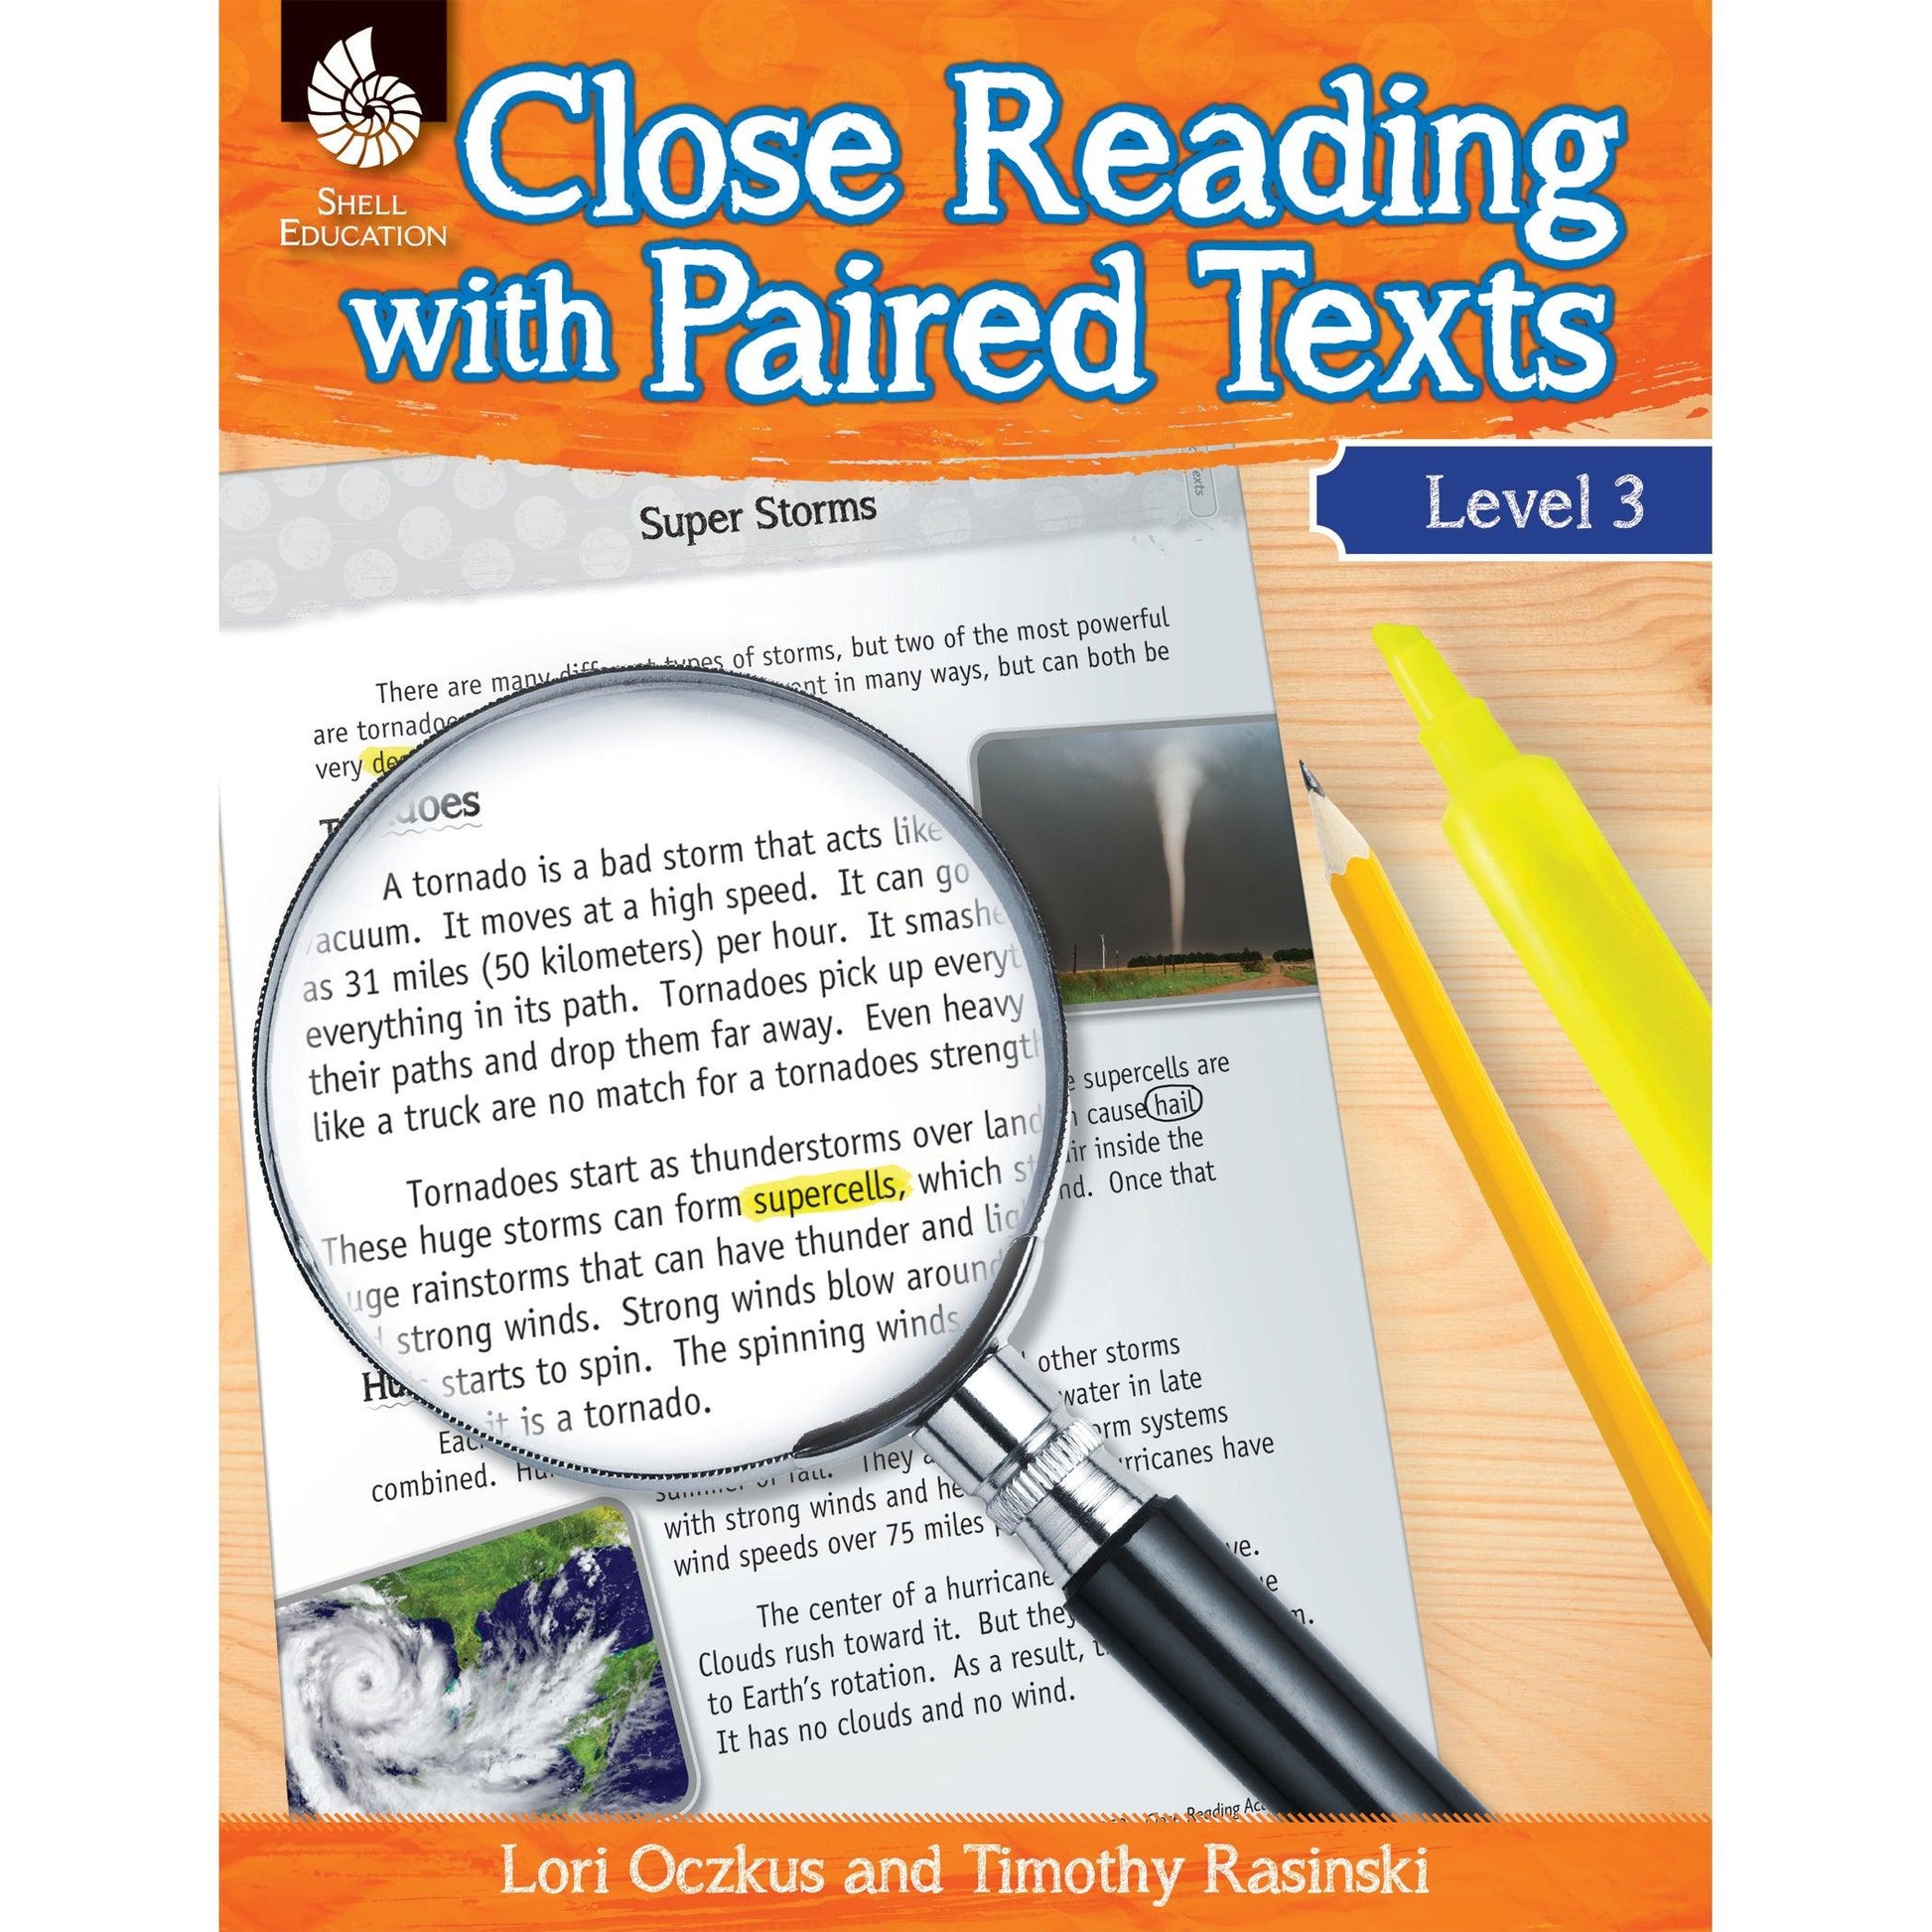 Close Reading with Paired Texts Level 3 - Loomini